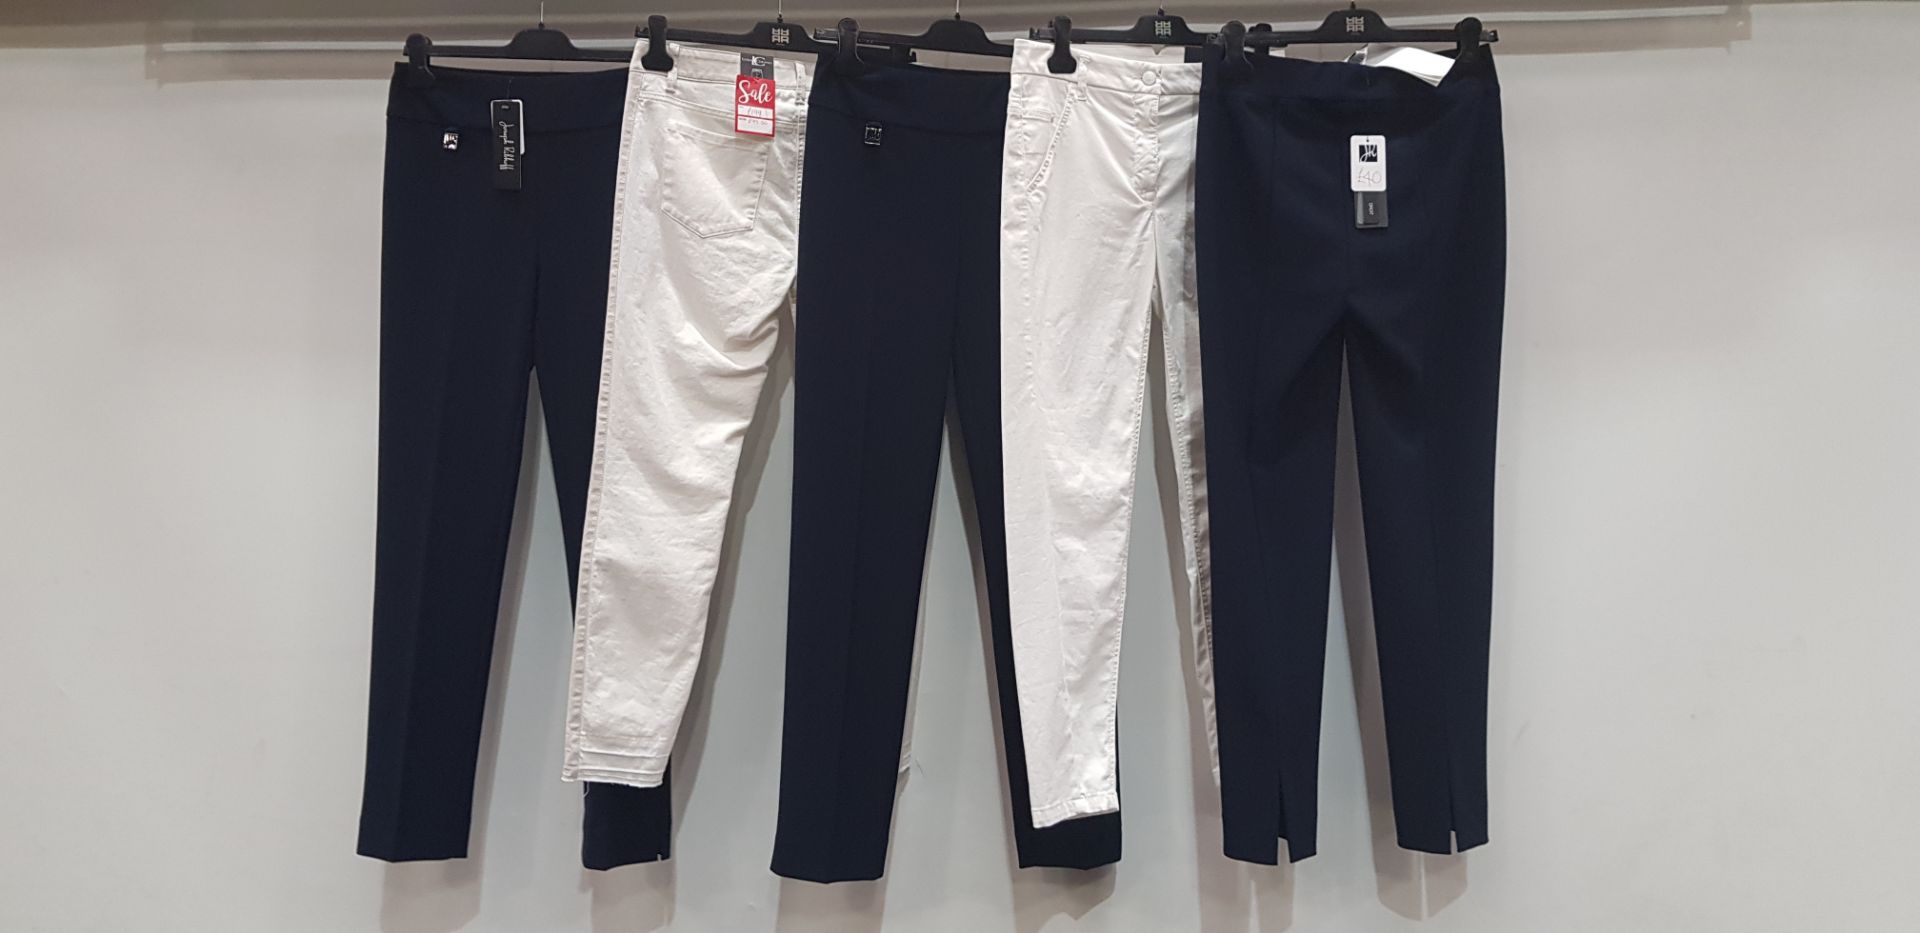 5 PIECE MIXED BRAND NEW PANTS LOT CONTAINING 3 X JOSEPH RILKOFF PANTS AND 2 X LUISA CERANO JEANS ALL